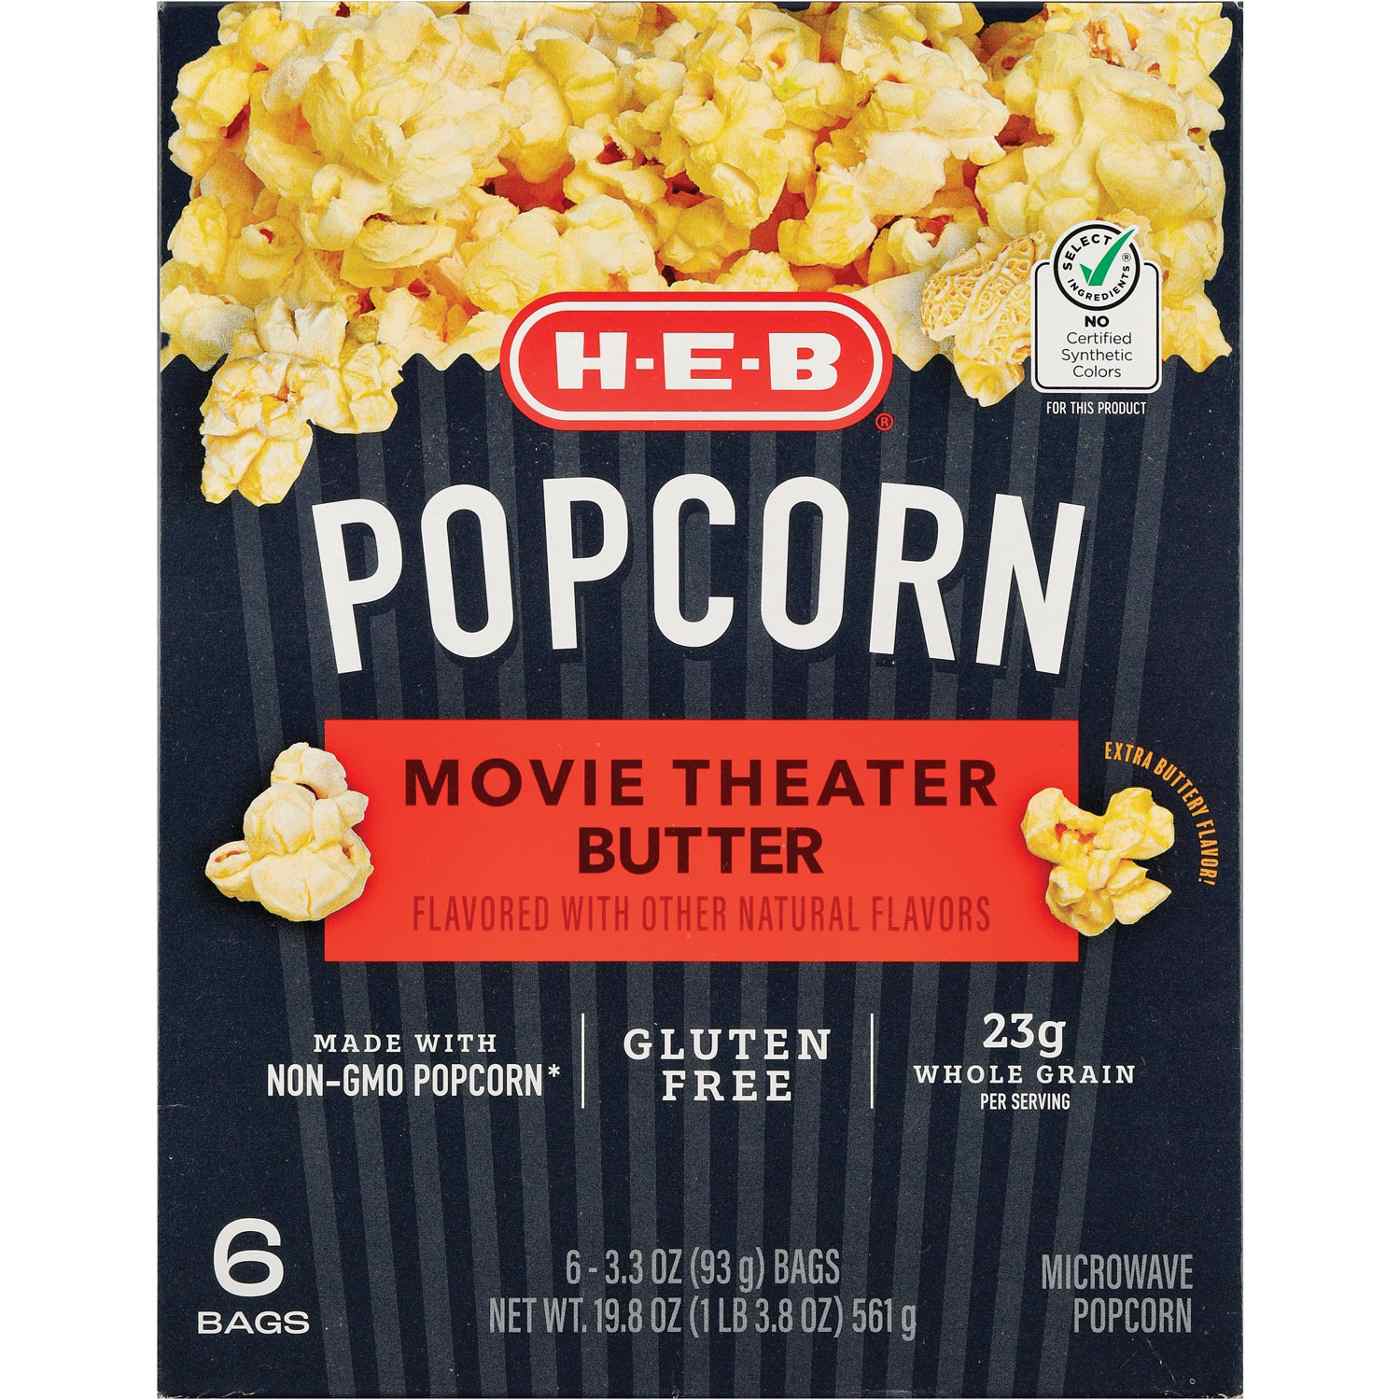 H-E-B Microwave Popcorn - Movie Theater Butter; image 1 of 2